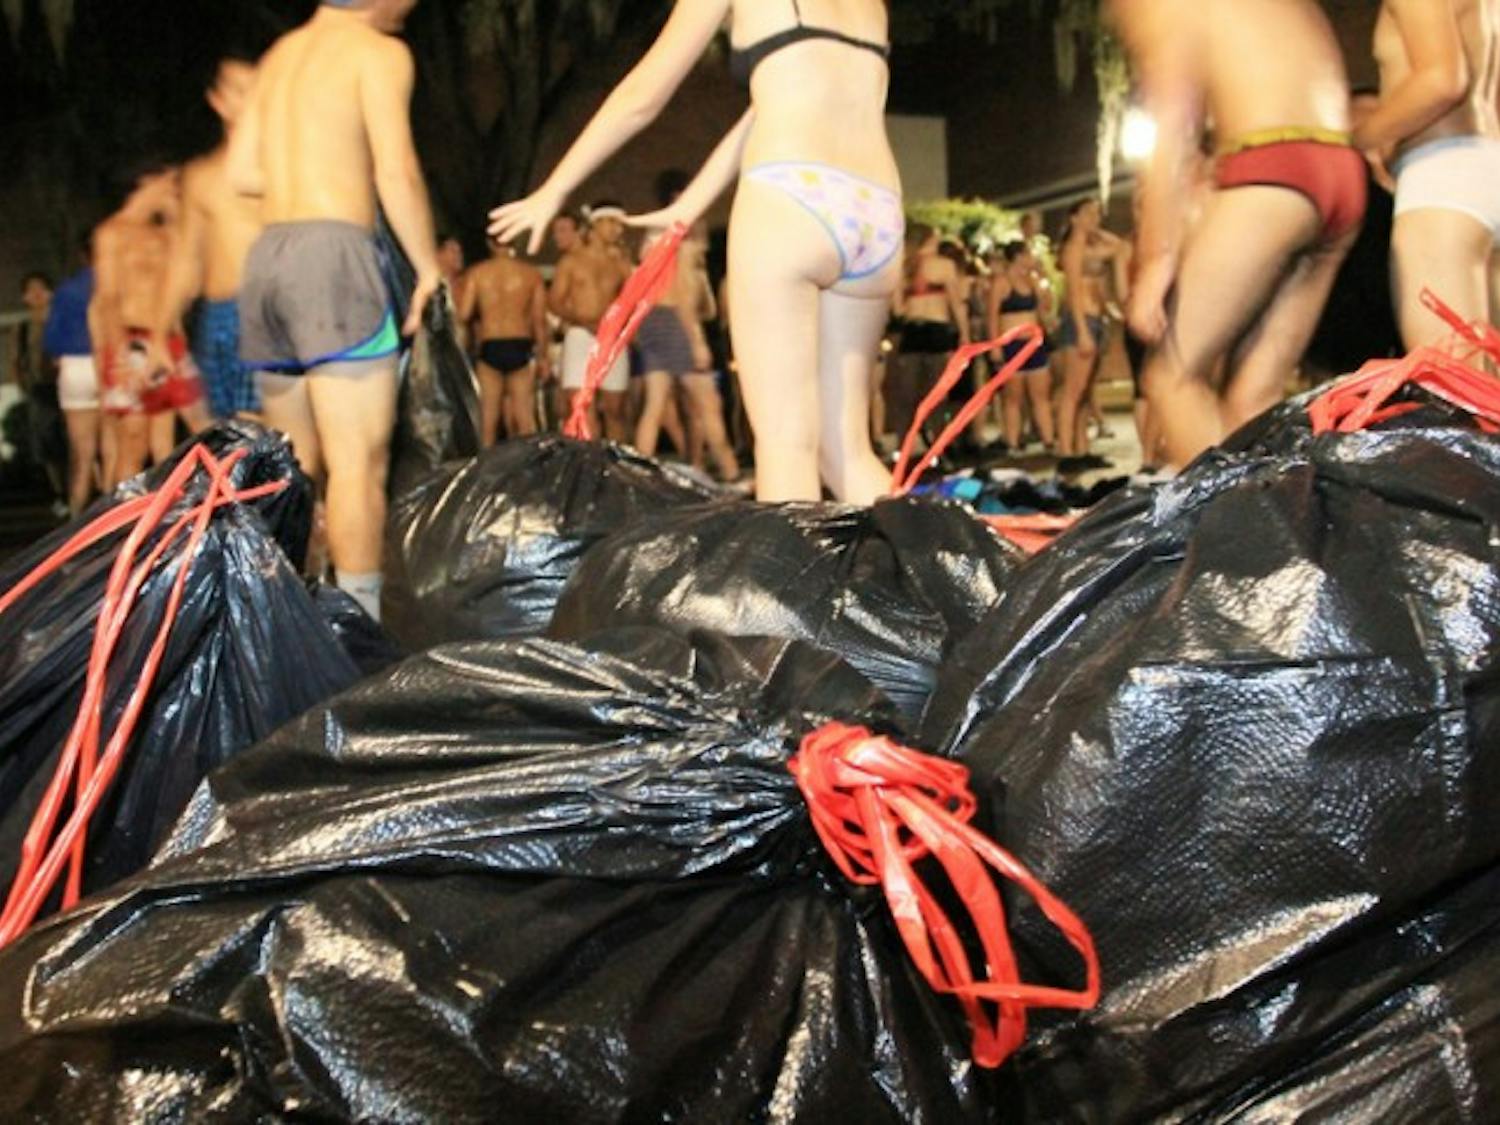 Participants in the Fall 2012 Underwear Dash strip off their clothes, which will be donated to St. Francis House, a Gainesville homeless shelter and soup kitchen. About 24 trash bags of clothing were donated.